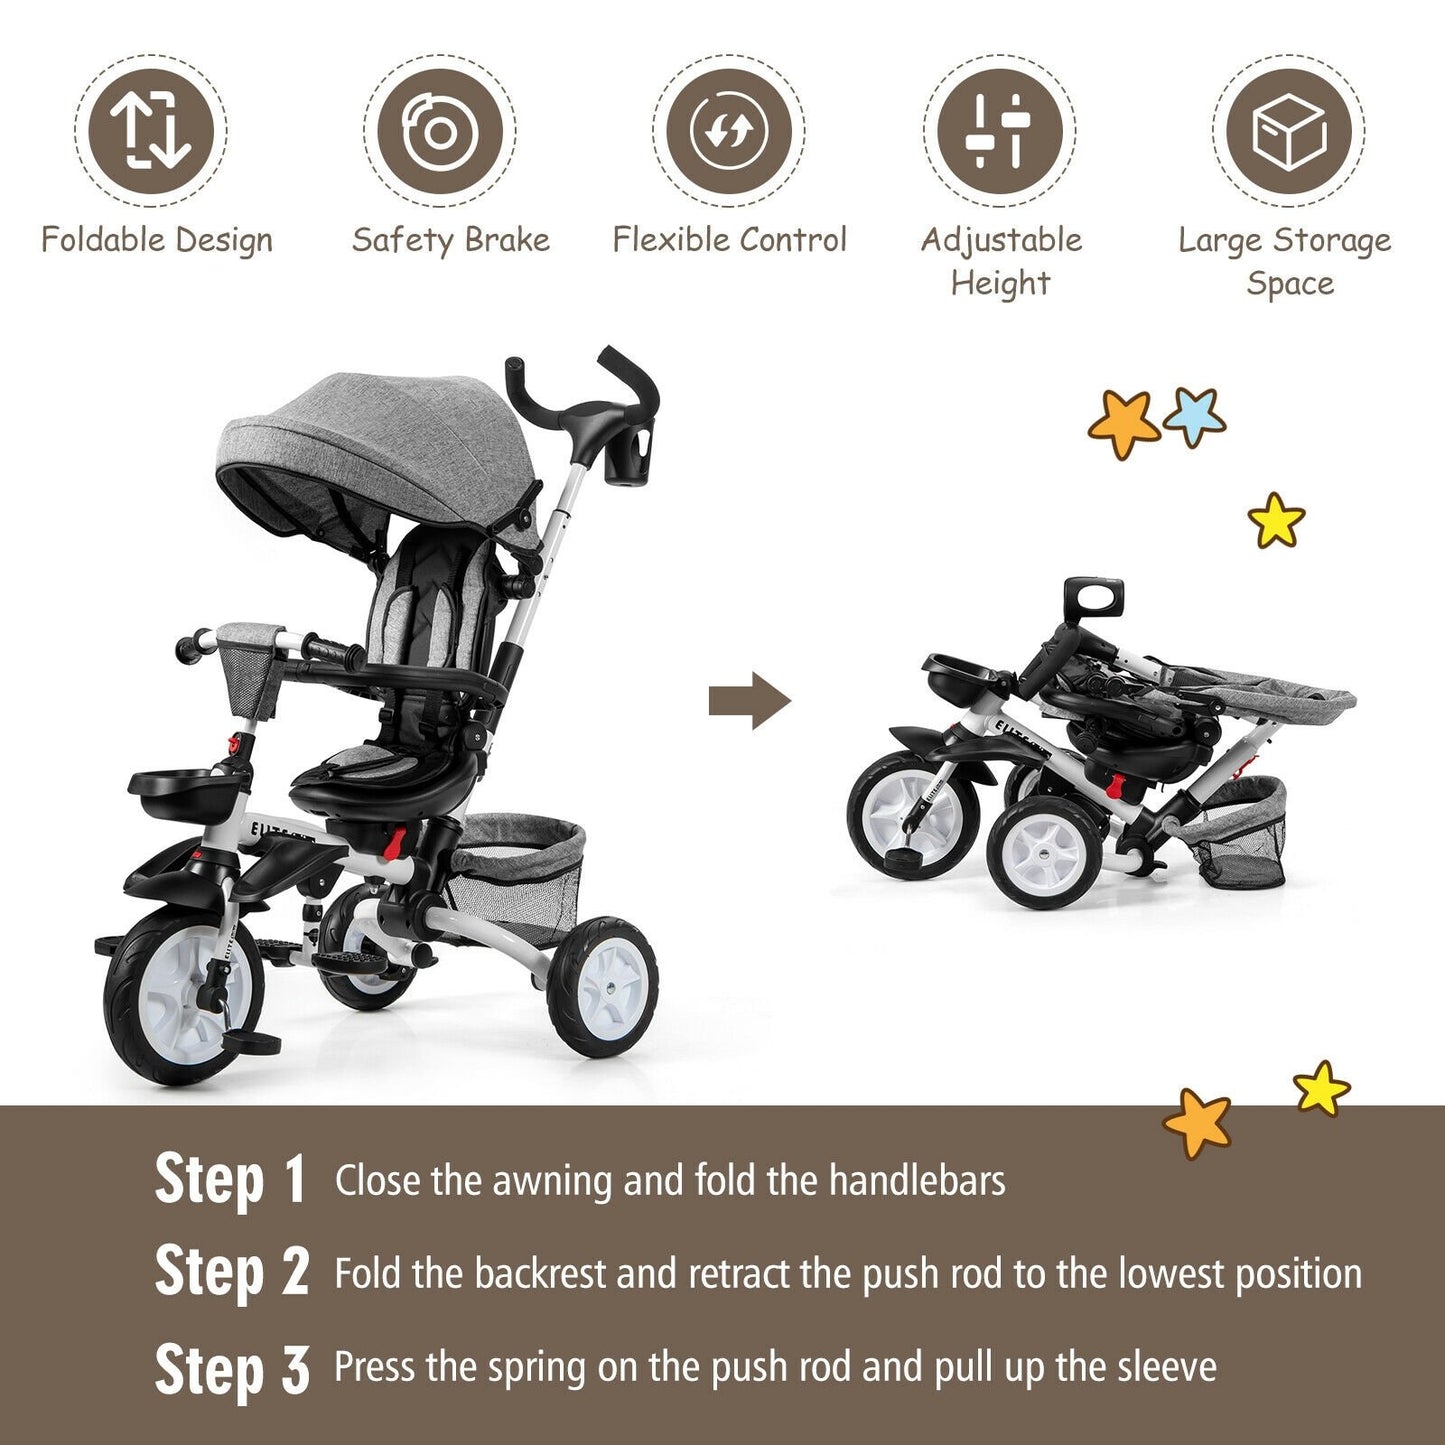 6-in-1 Detachable Kids Baby Stroller Tricycle with Canopy and Safety Harness, Gray